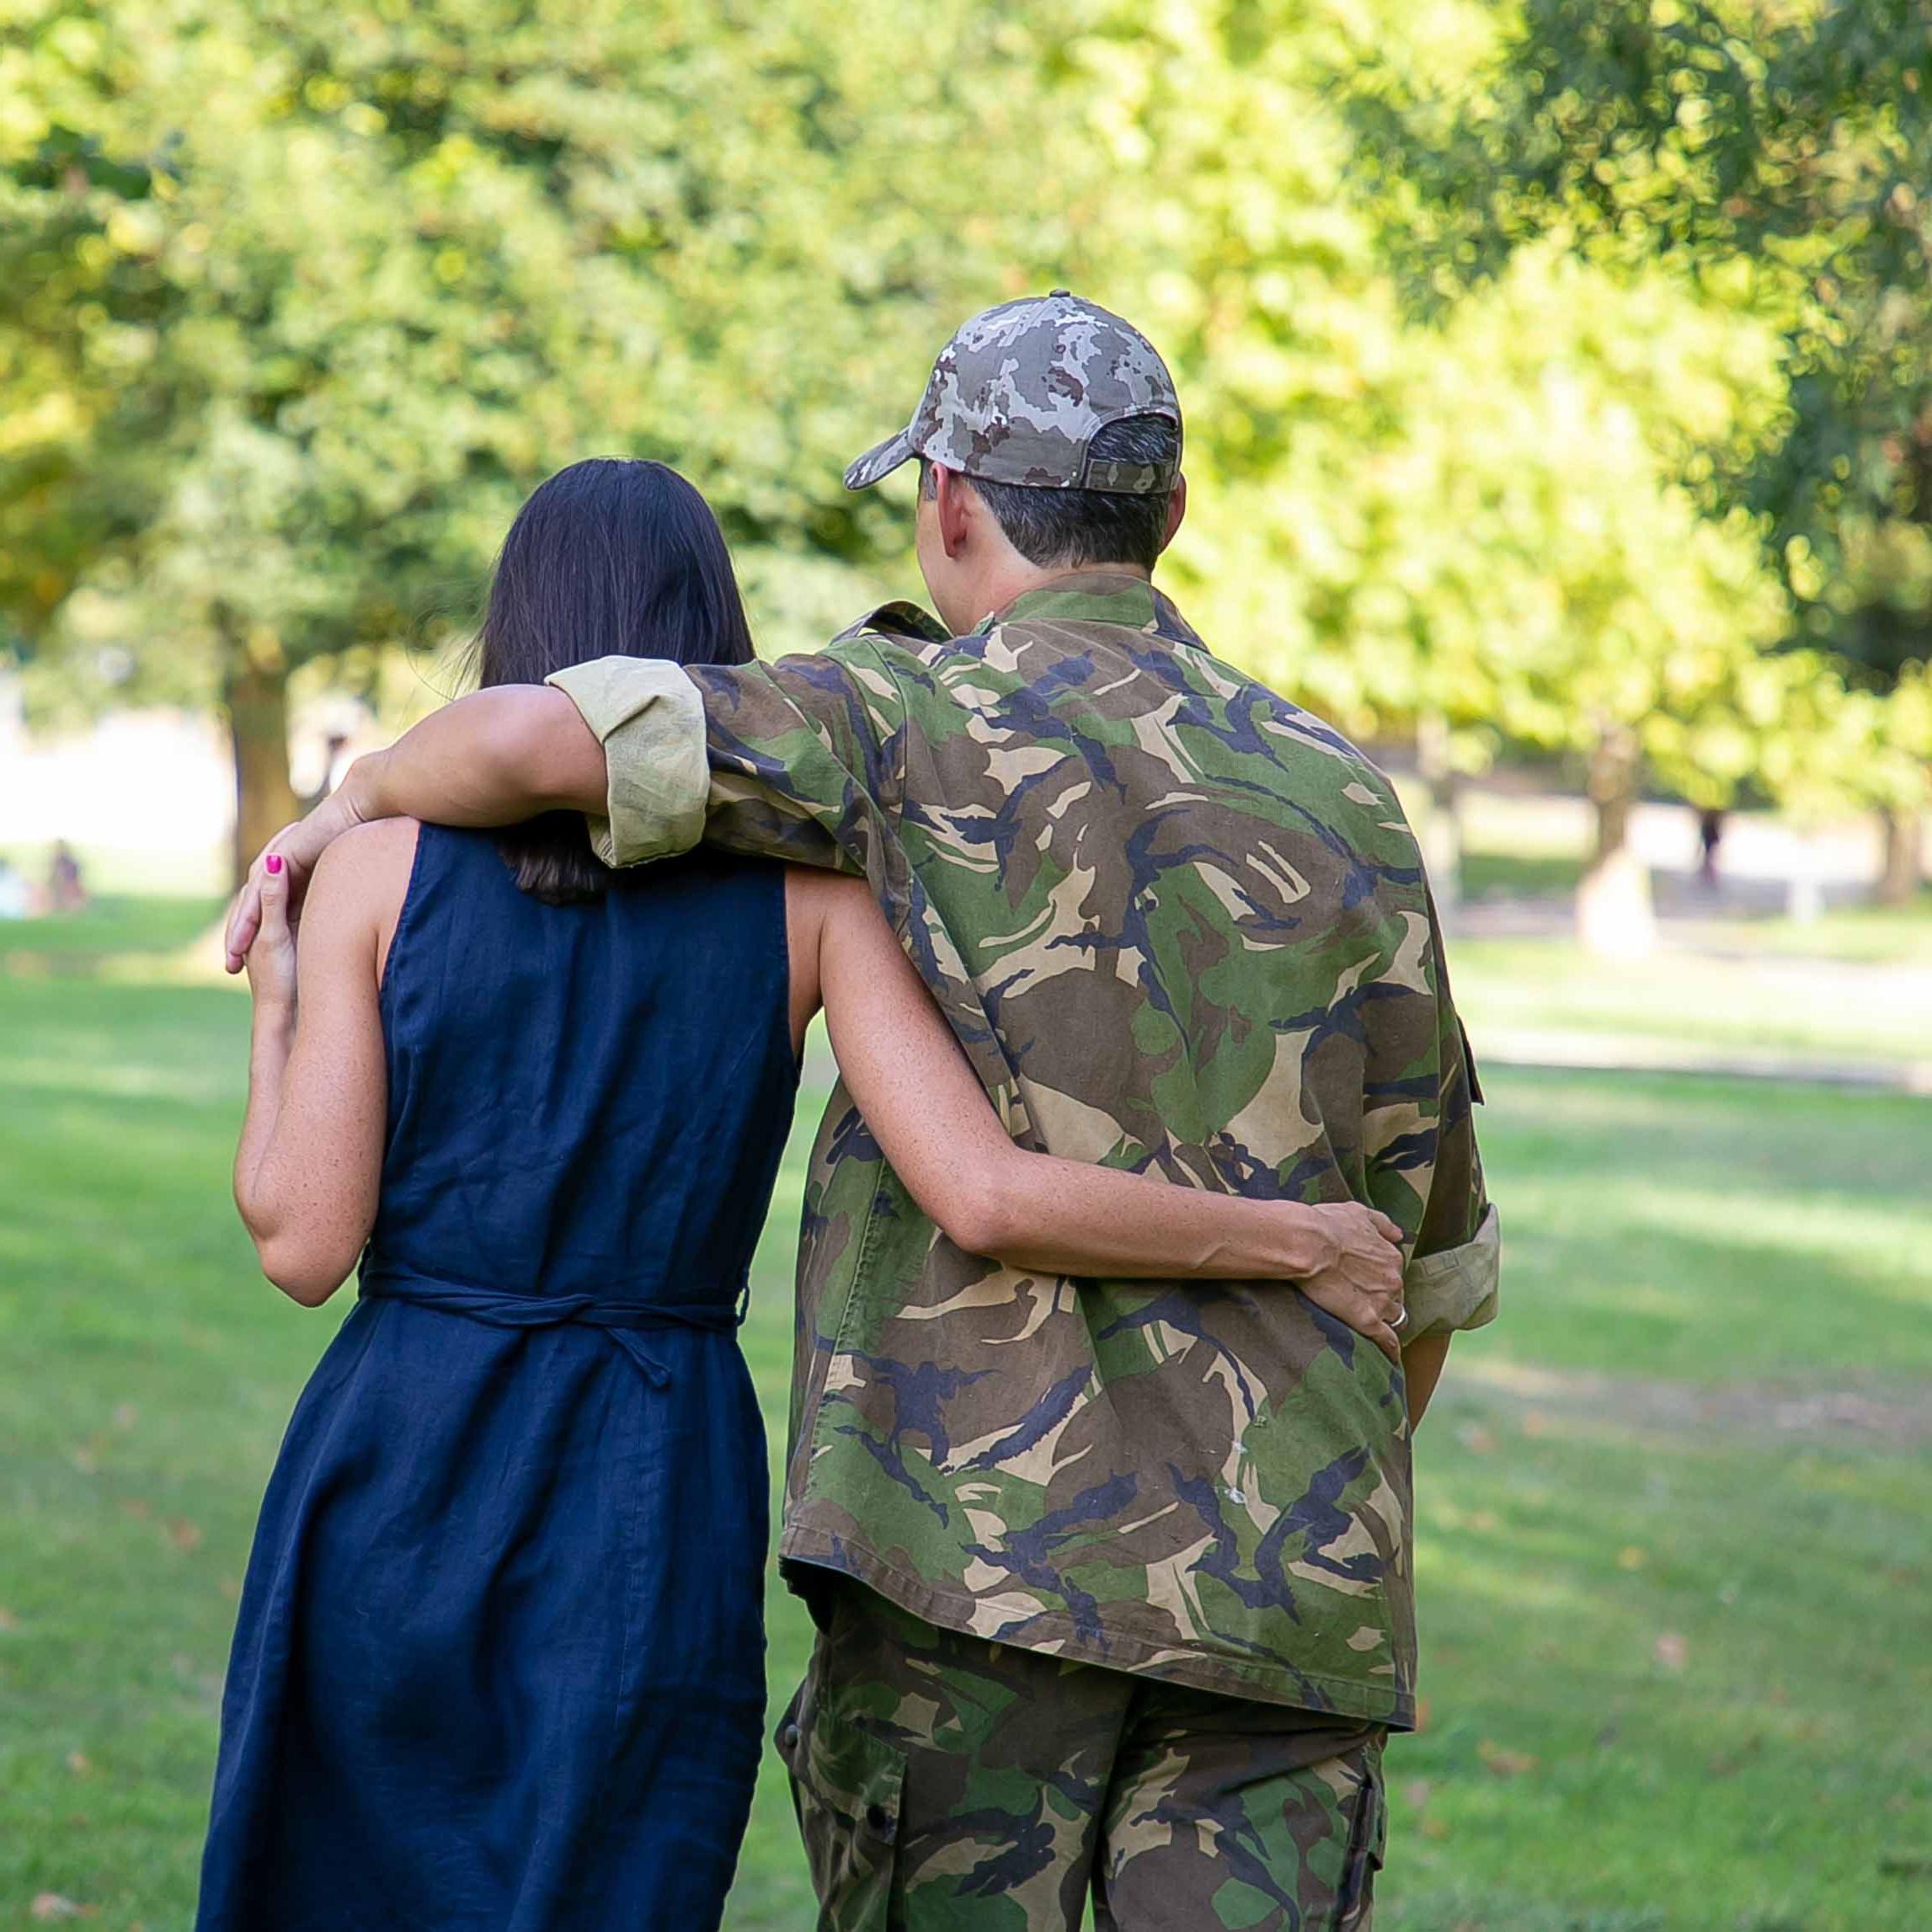 A man in the military walking with his arm around a woman.